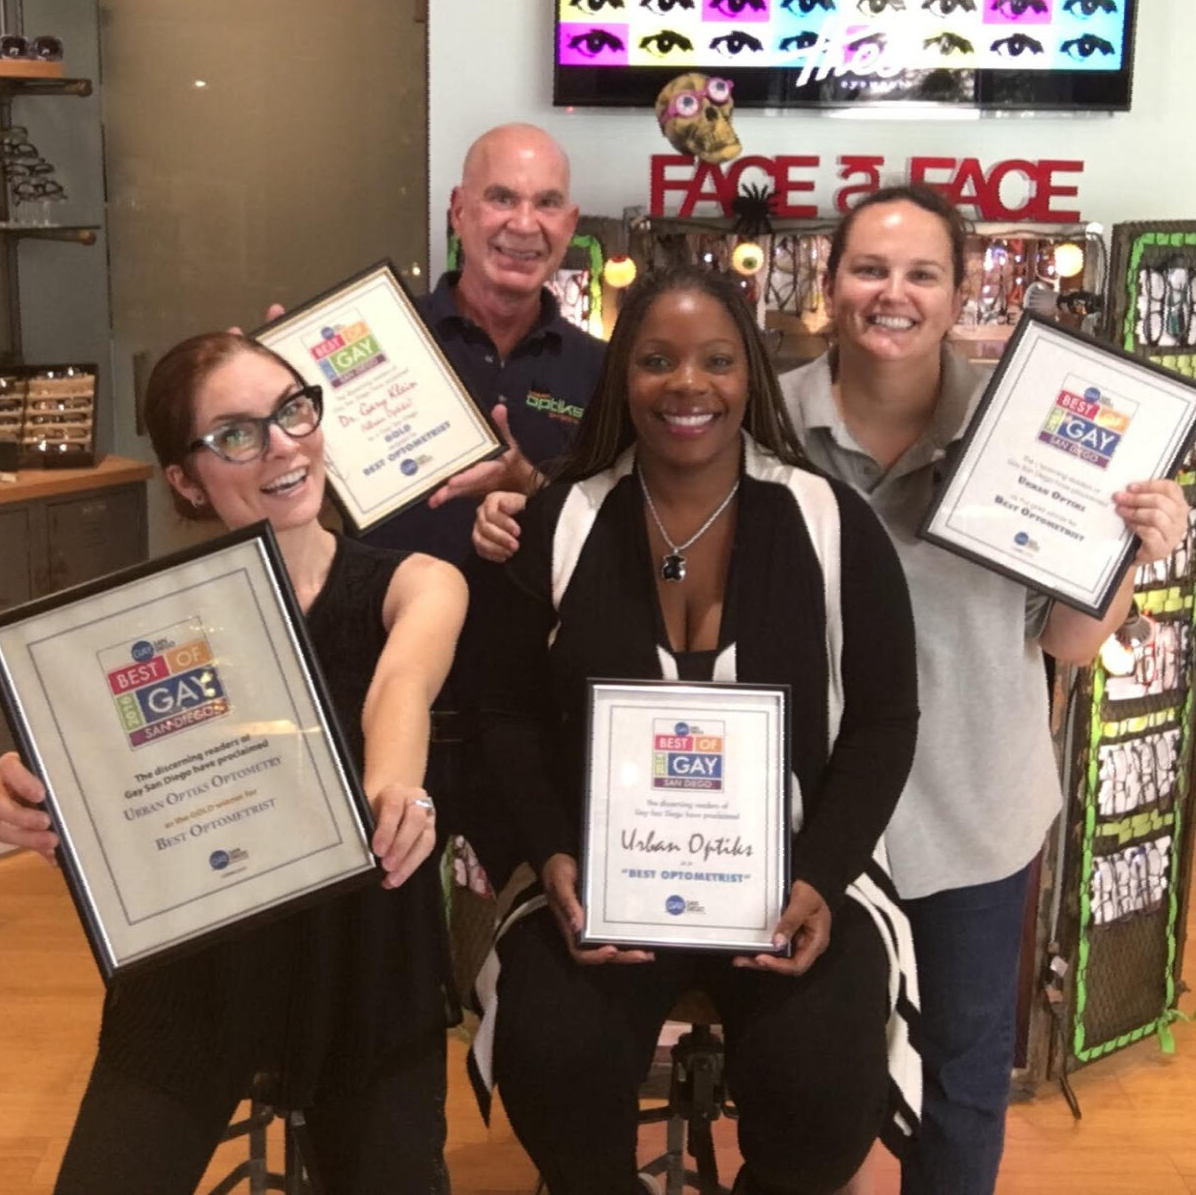 Four team members posing with four framed award certificates